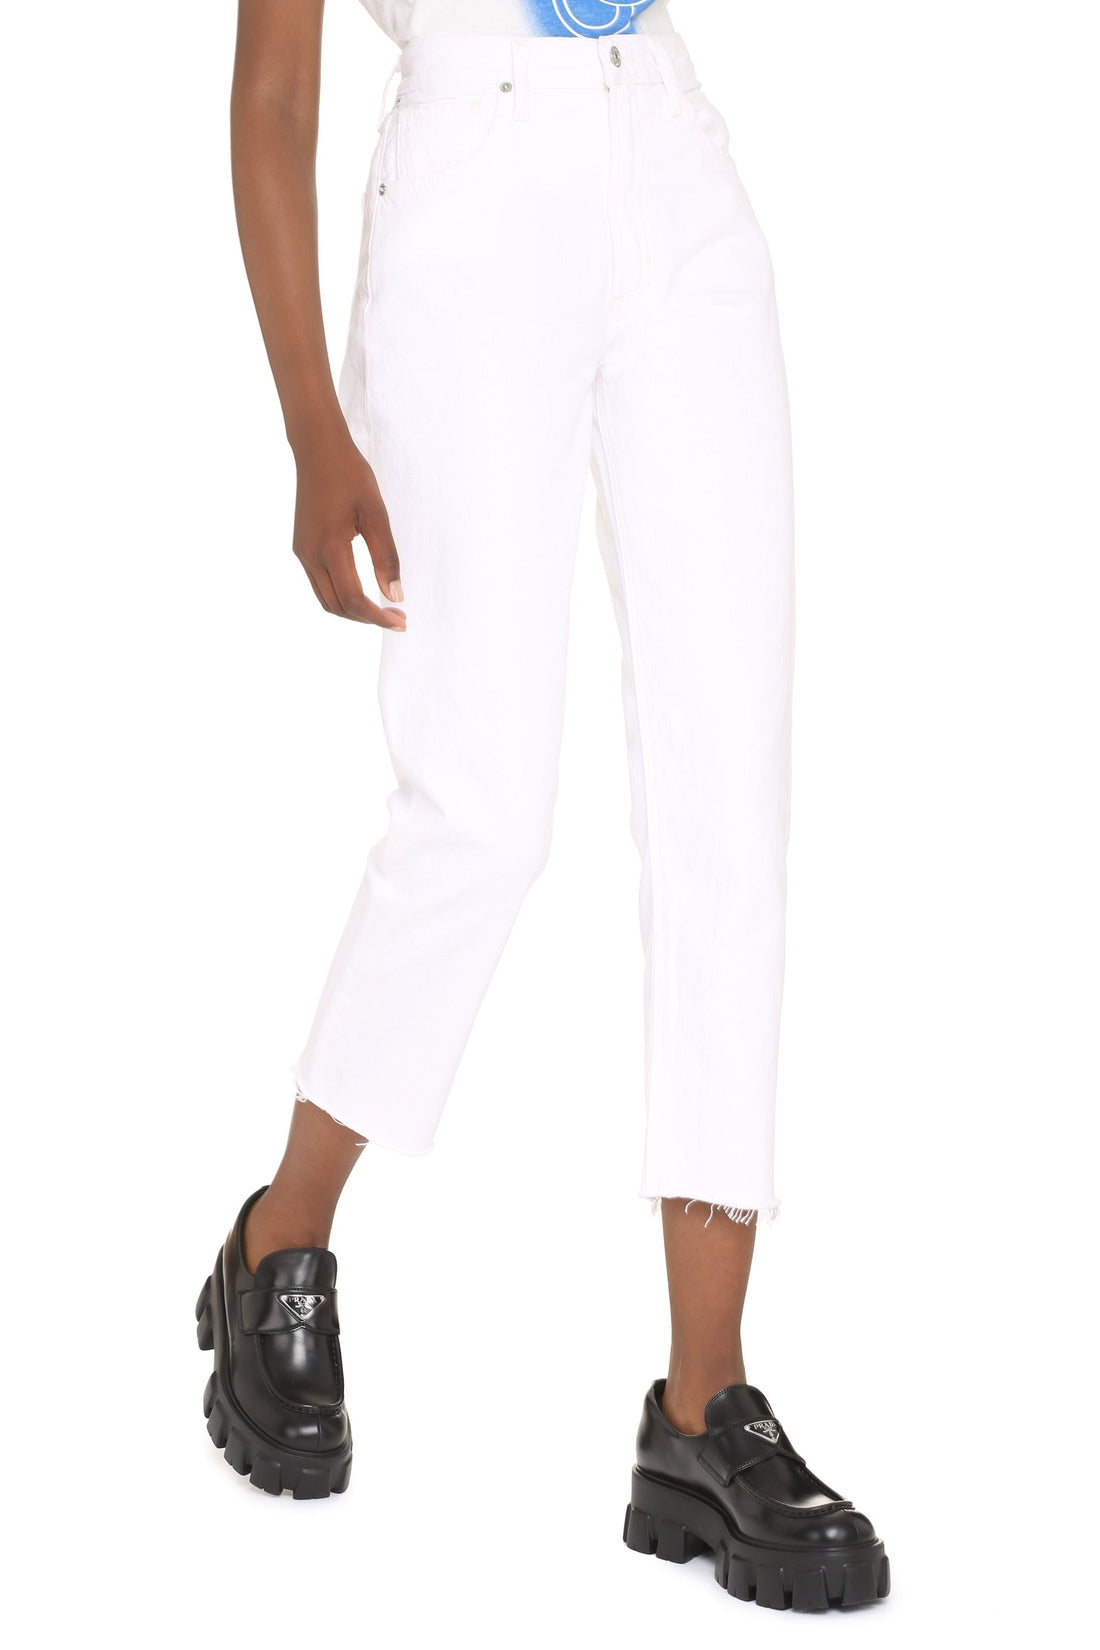 Citizens of Humanity-OUTLET-SALE-Daphne Crop stovepipe jeans-ARCHIVIST